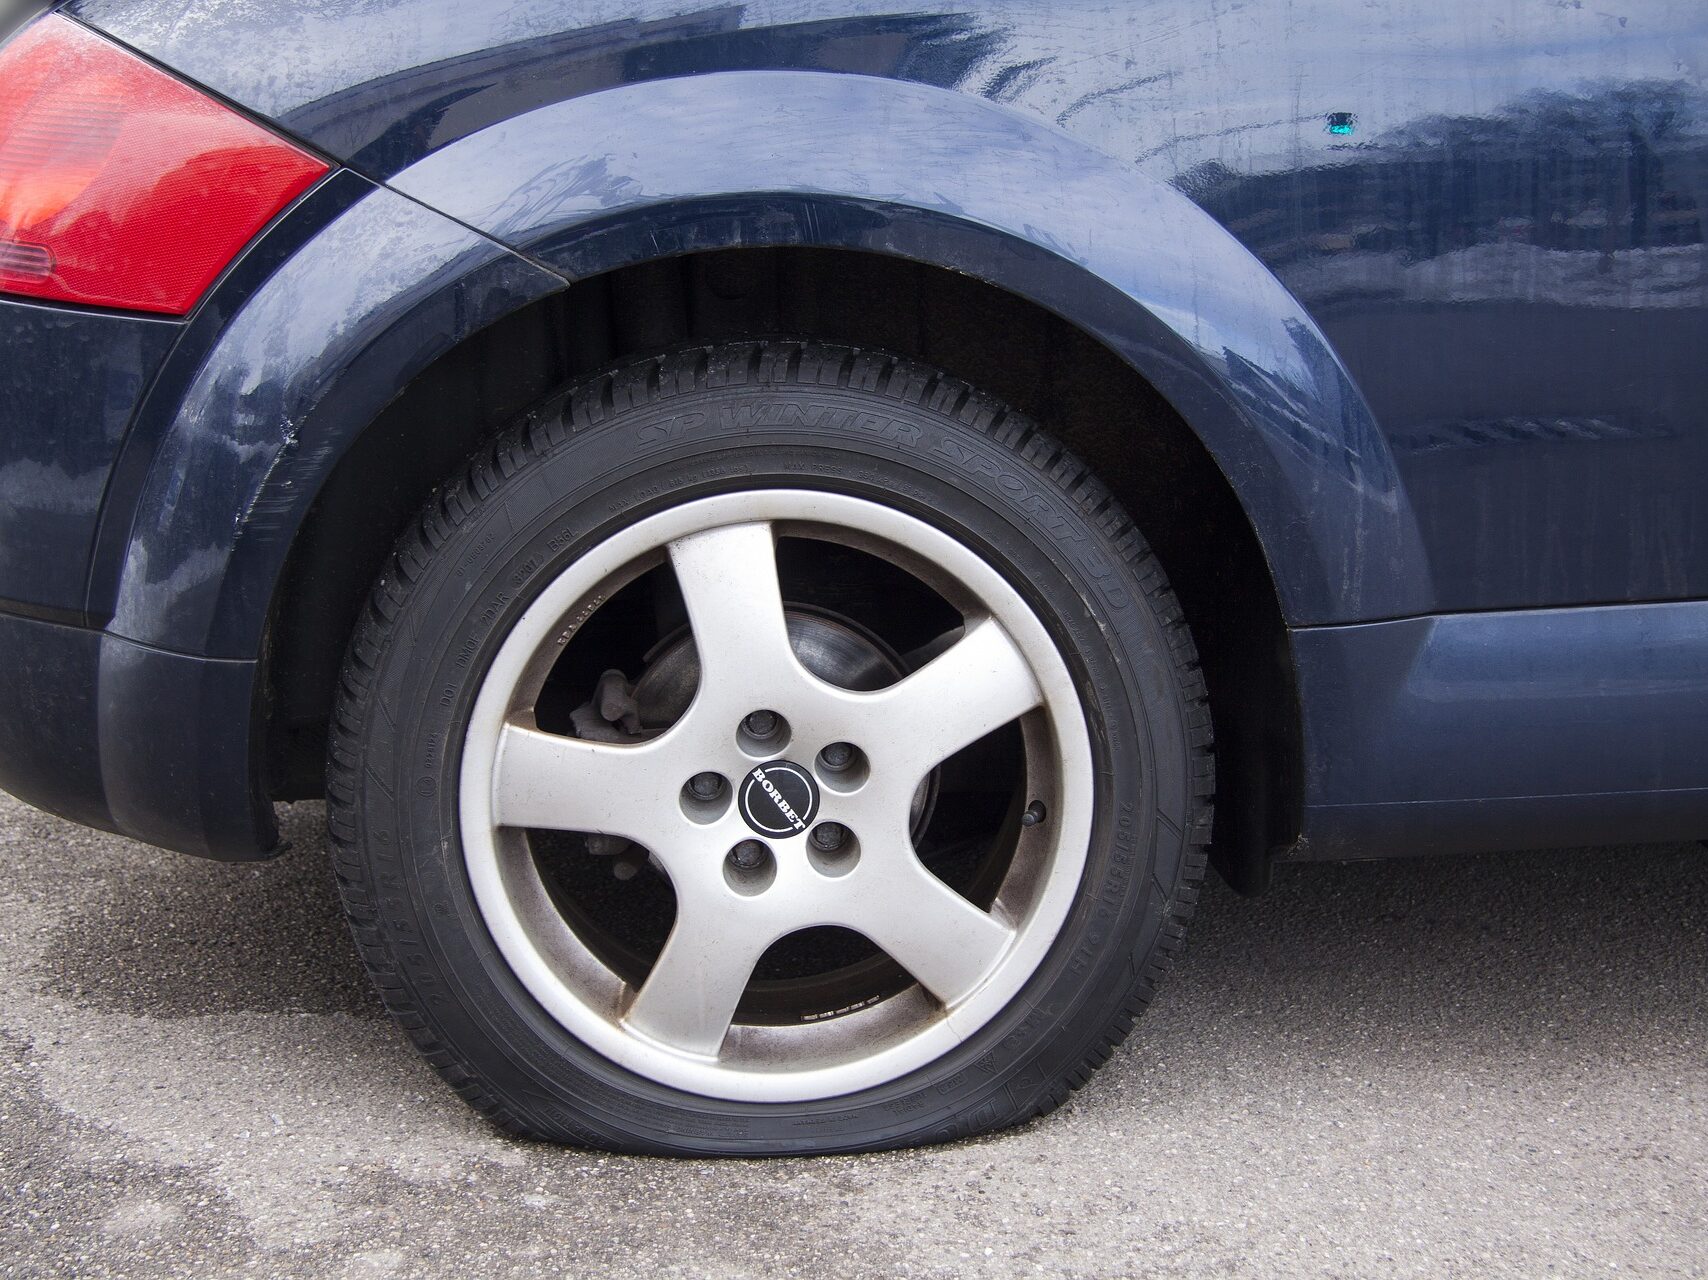 Flat tires are a common occurance. Don't get caught out!